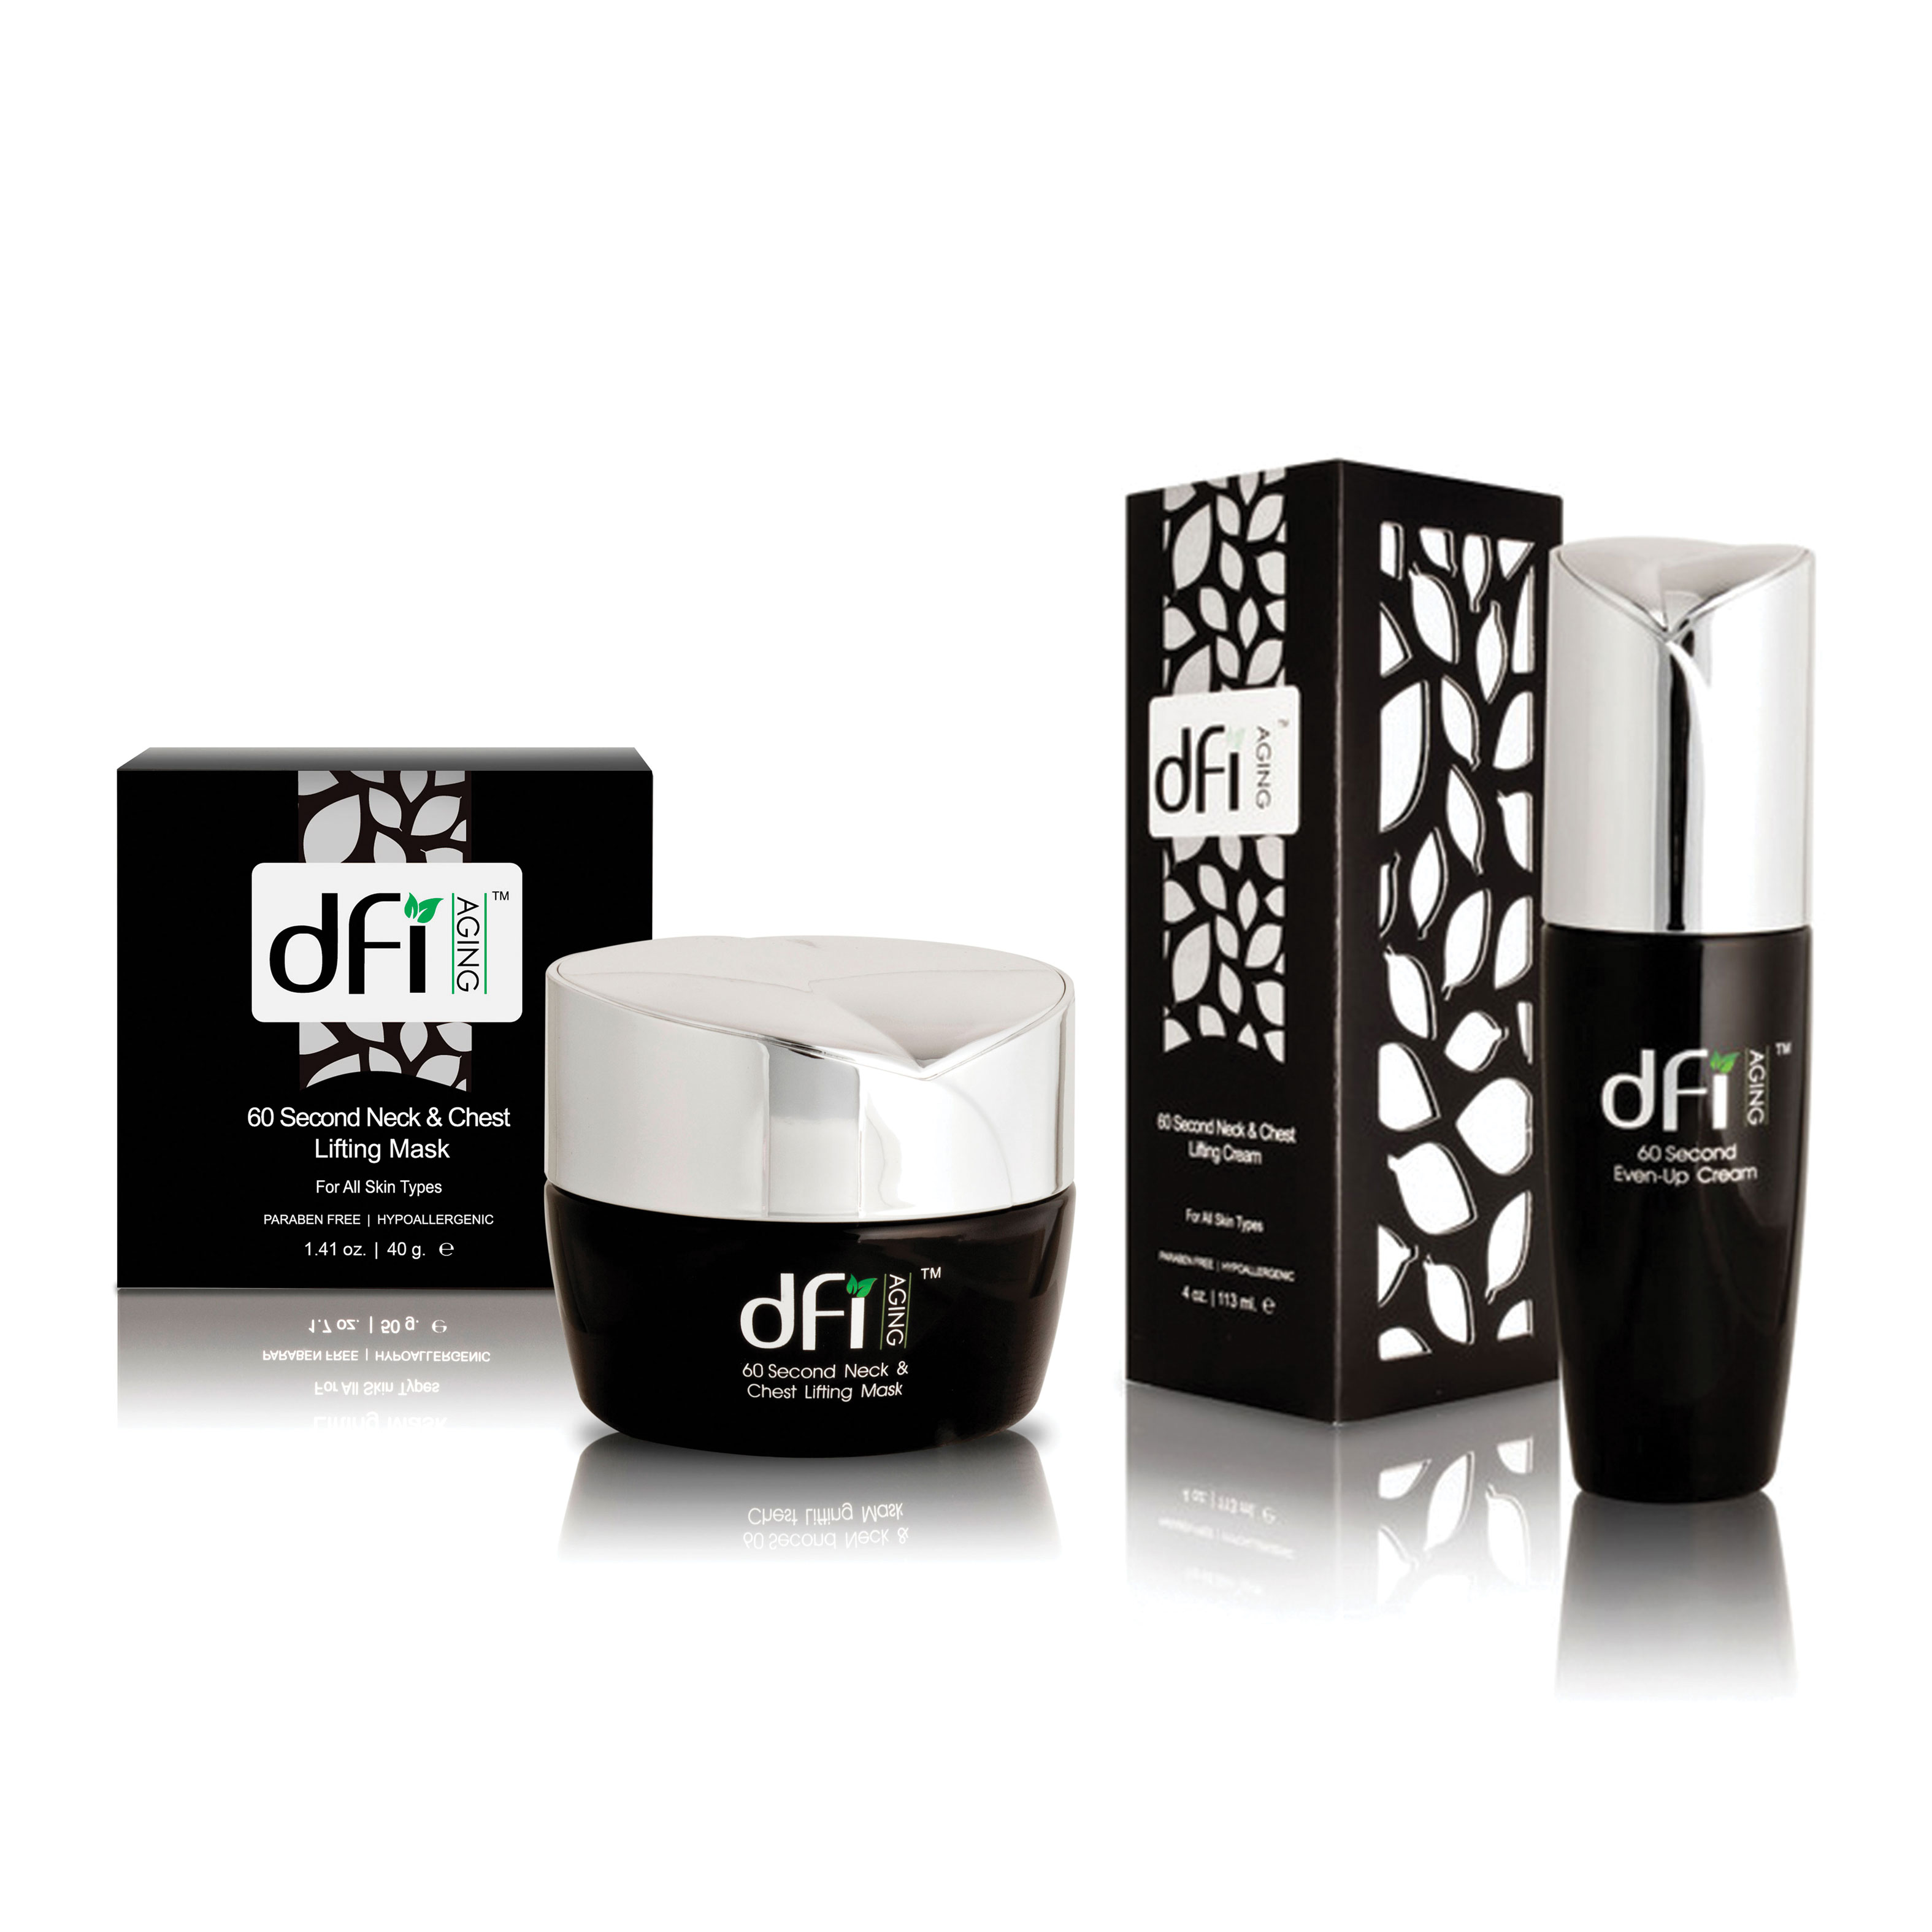 Product Branding and Packaging Design for dfi Aging Skincare's 60 Second Lifting Mask and Even Up Cream.